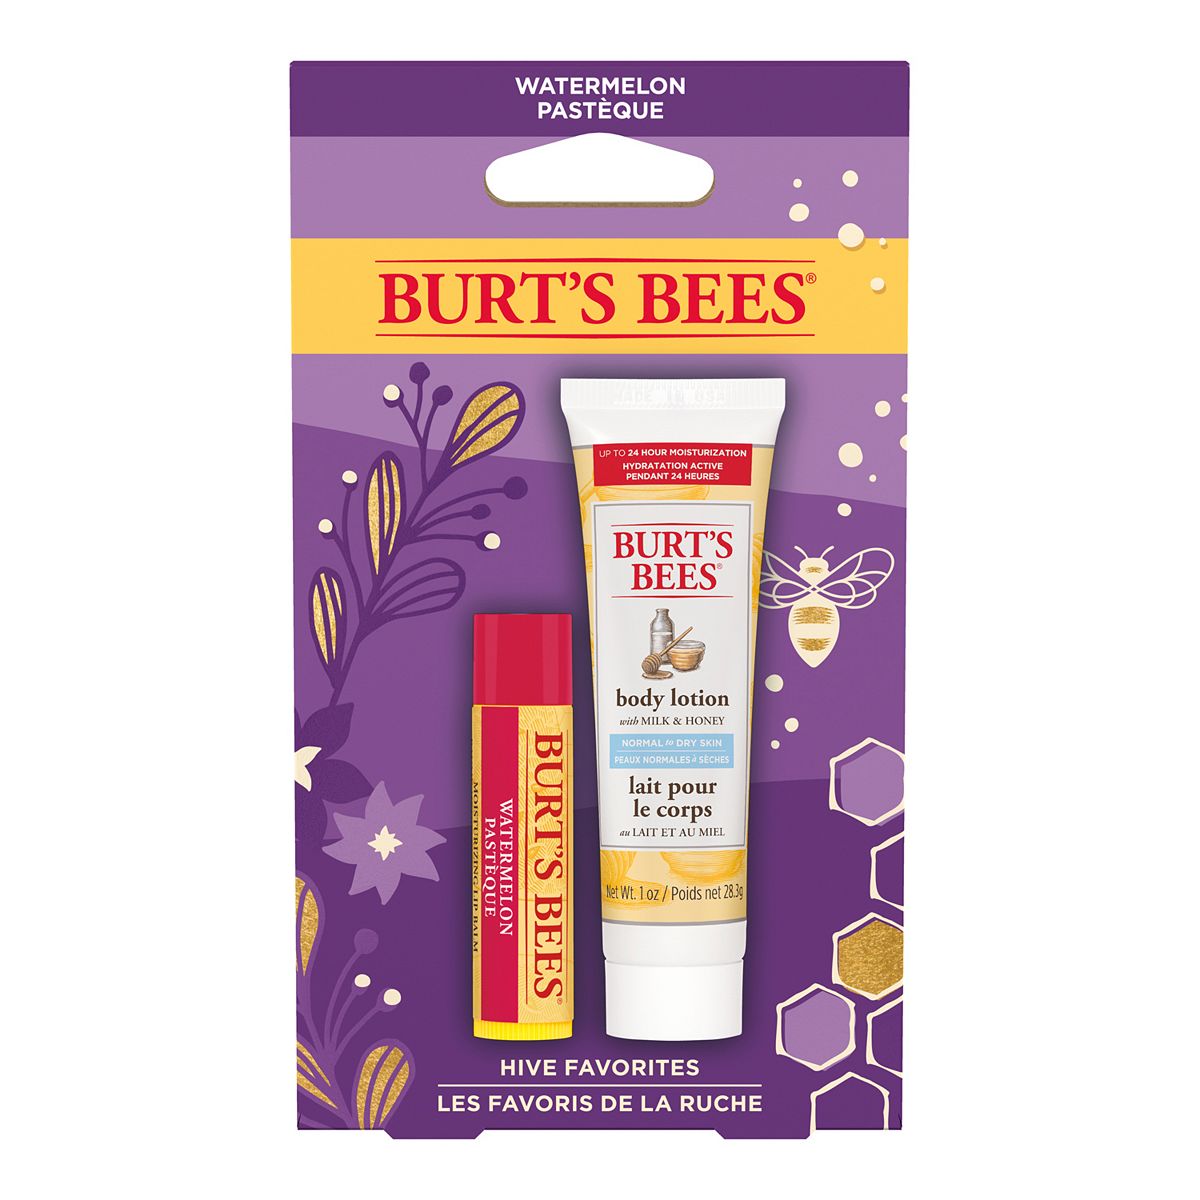 Burt's Bees: Hive Favorites Holiday Gift Set $2.50, 4-Piece Lip Balm Holiday Gift Set (Assorted Mix or Original) $6 + Free Shipping on $49+